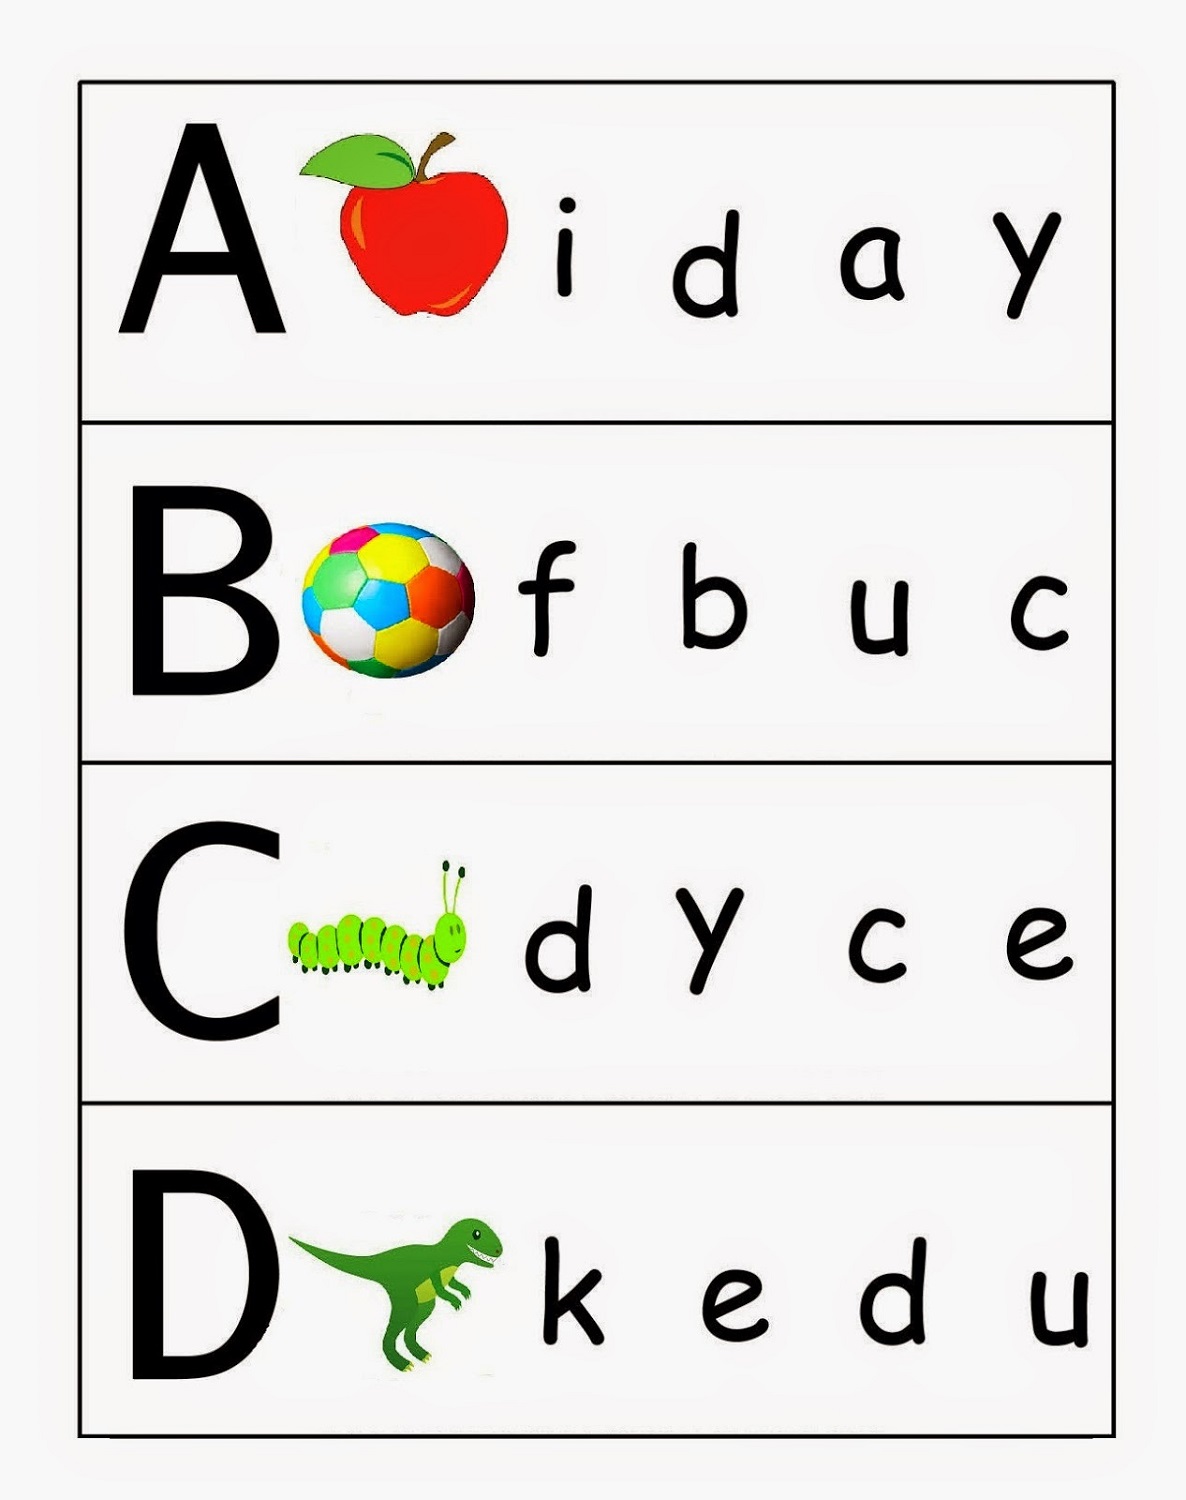 capital-and-lowercase-letters-for-kids-101-activity